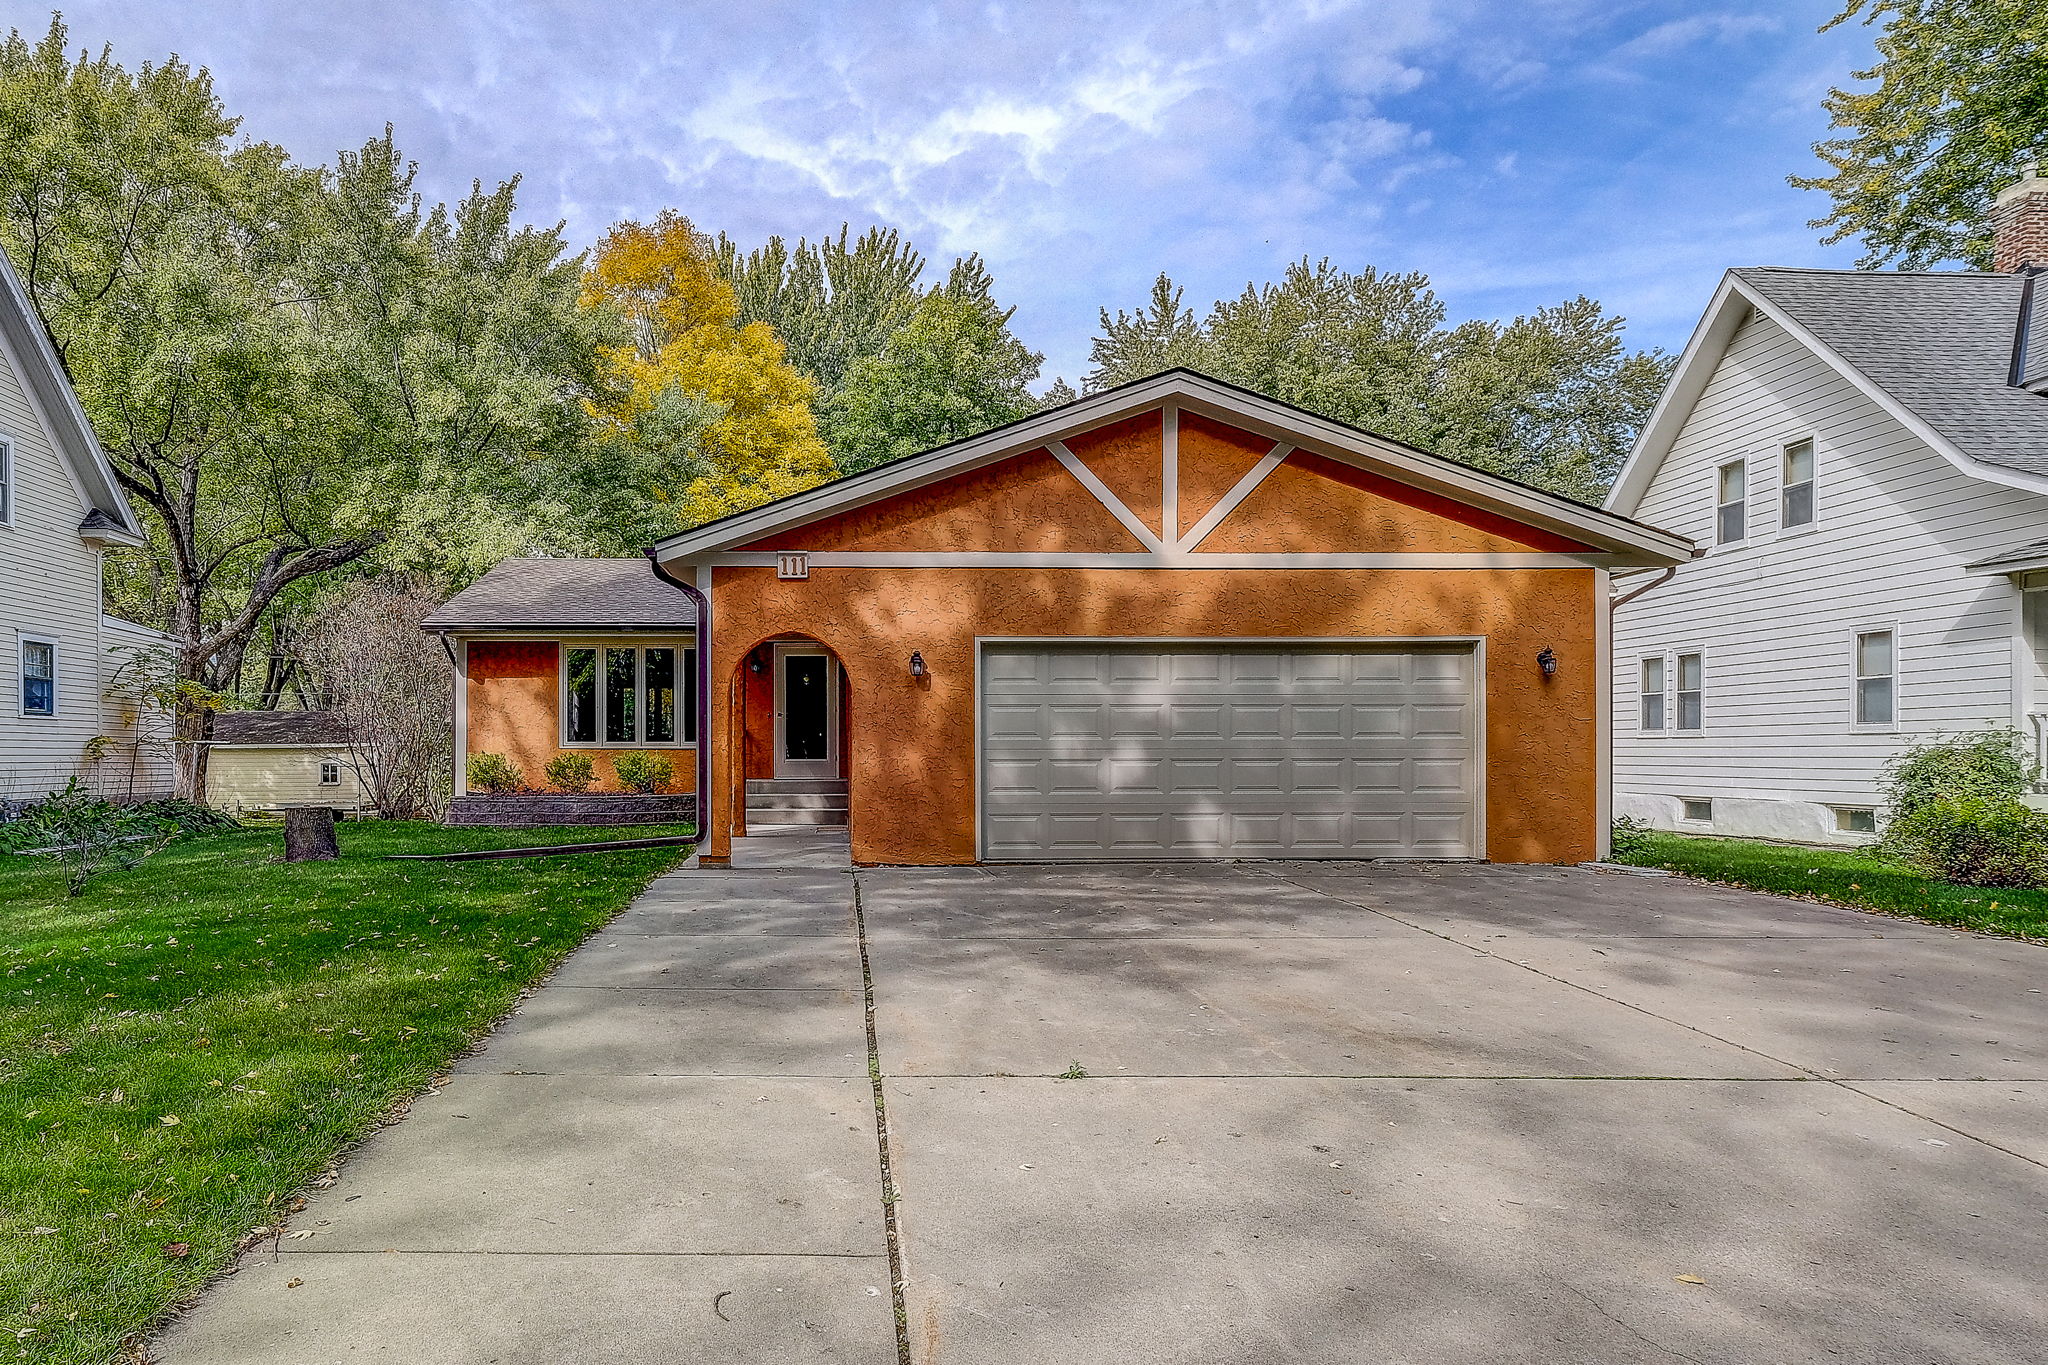  111 Franklin Ave SW, Watertown, MN 55388, US